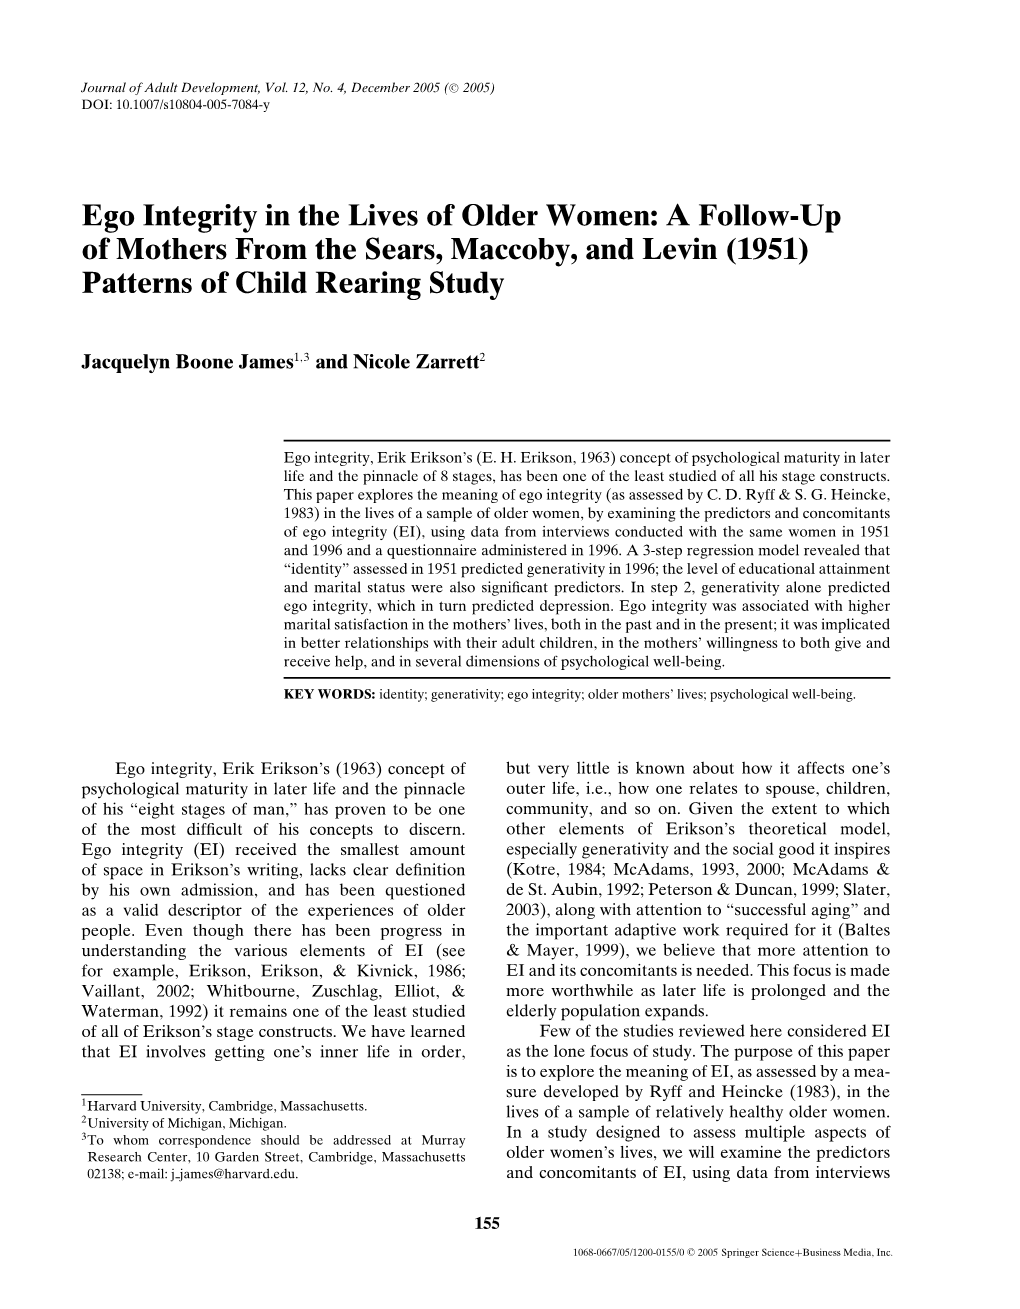 Ego Integrity in the Lives of Older Women: a Follow-Up of Mothers from the Sears, Maccoby, and Levin (1951) Patterns of Child Rearing Study